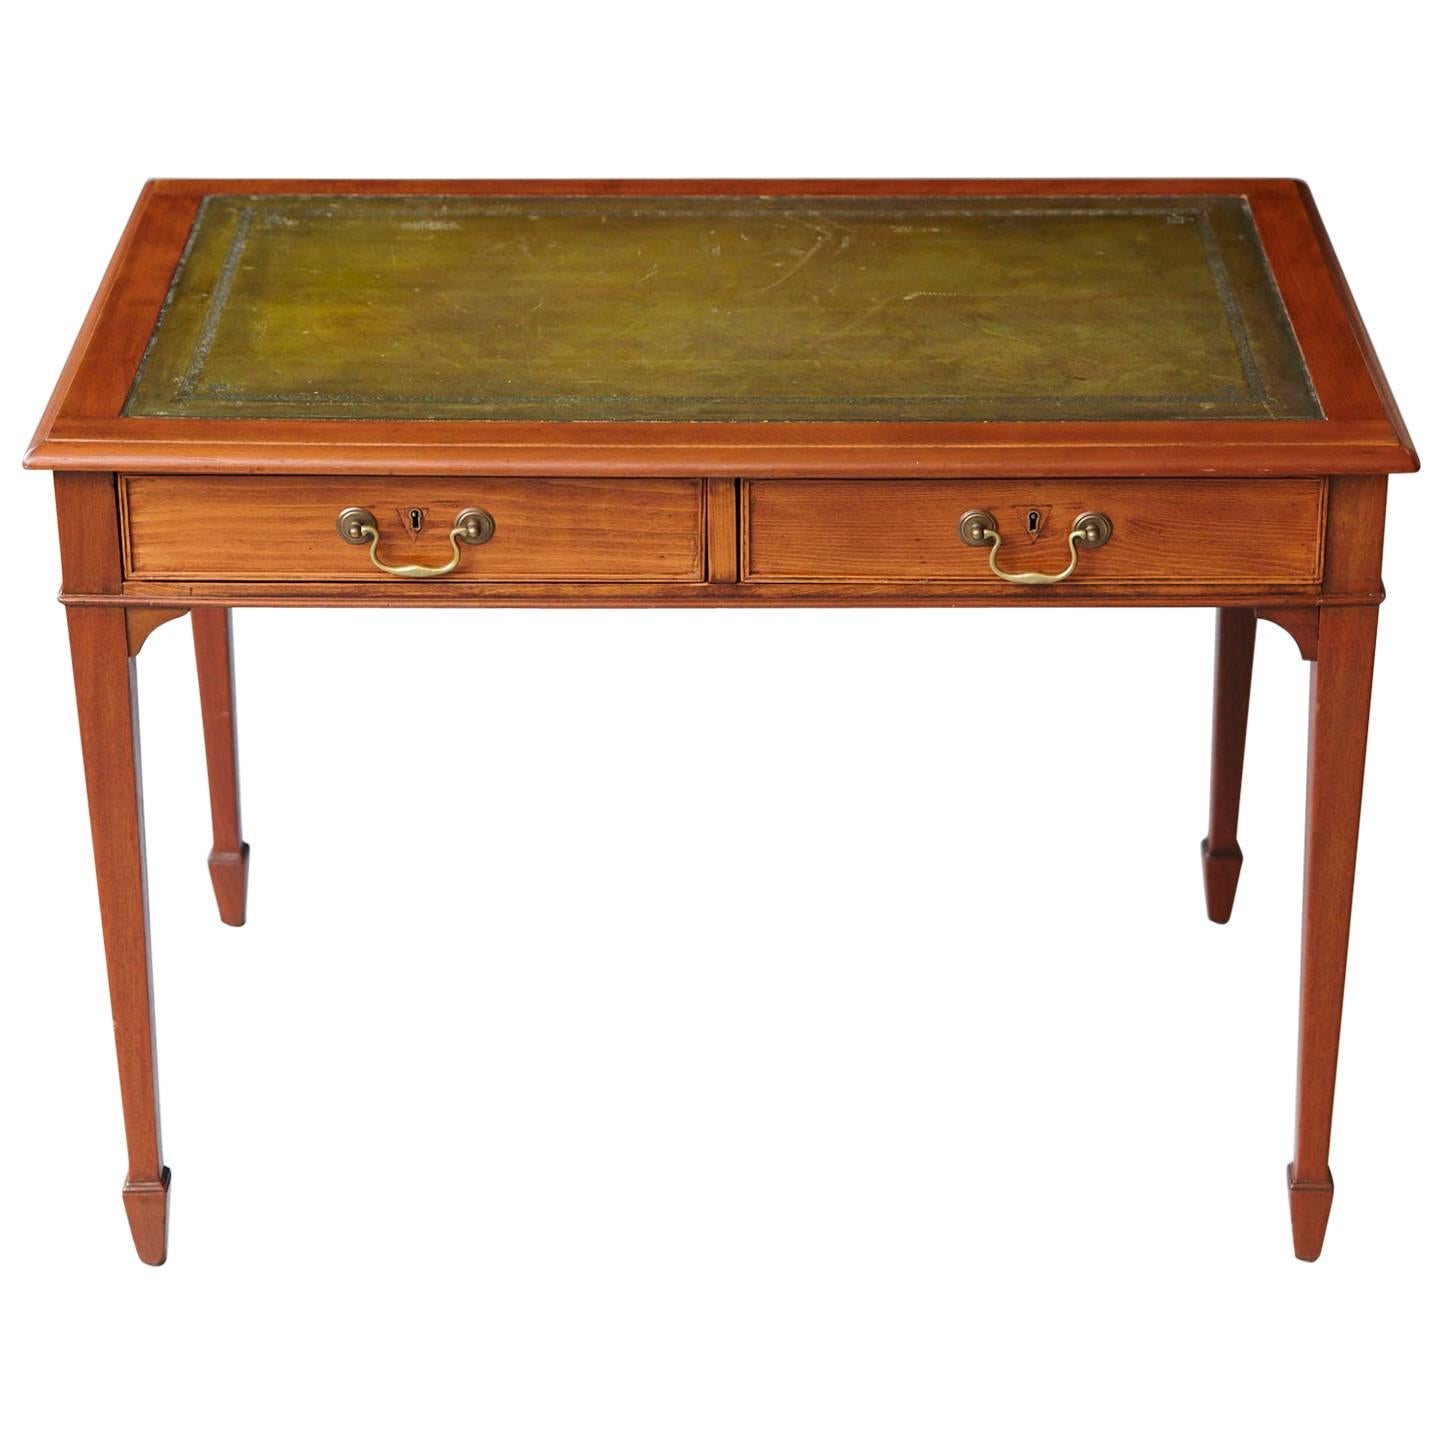 French Neoclassical Style Walnut Leather Top Desk